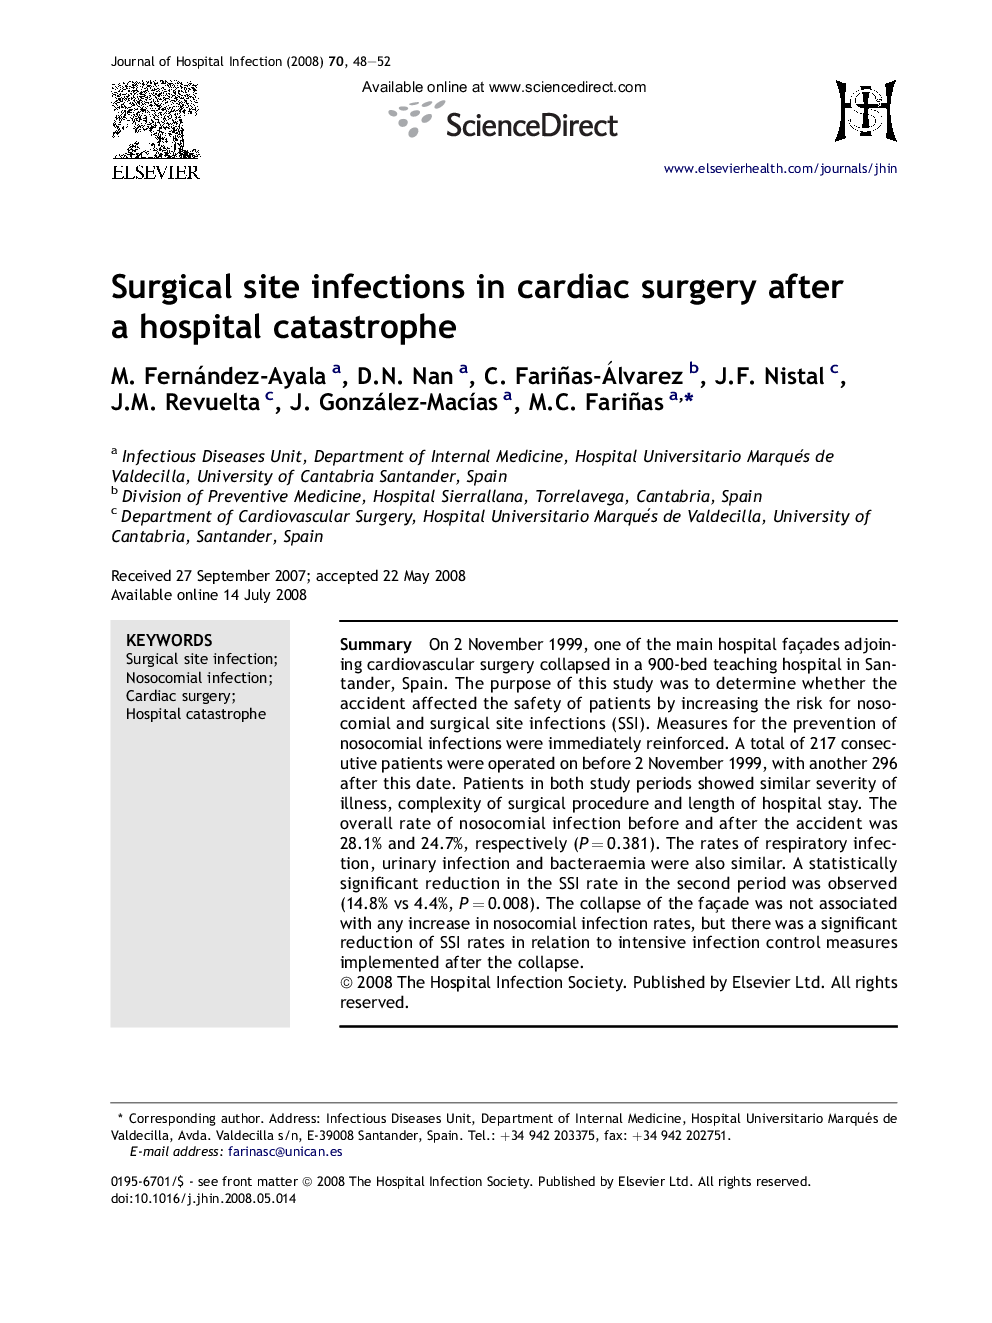 Surgical site infections in cardiac surgery after a hospital catastrophe